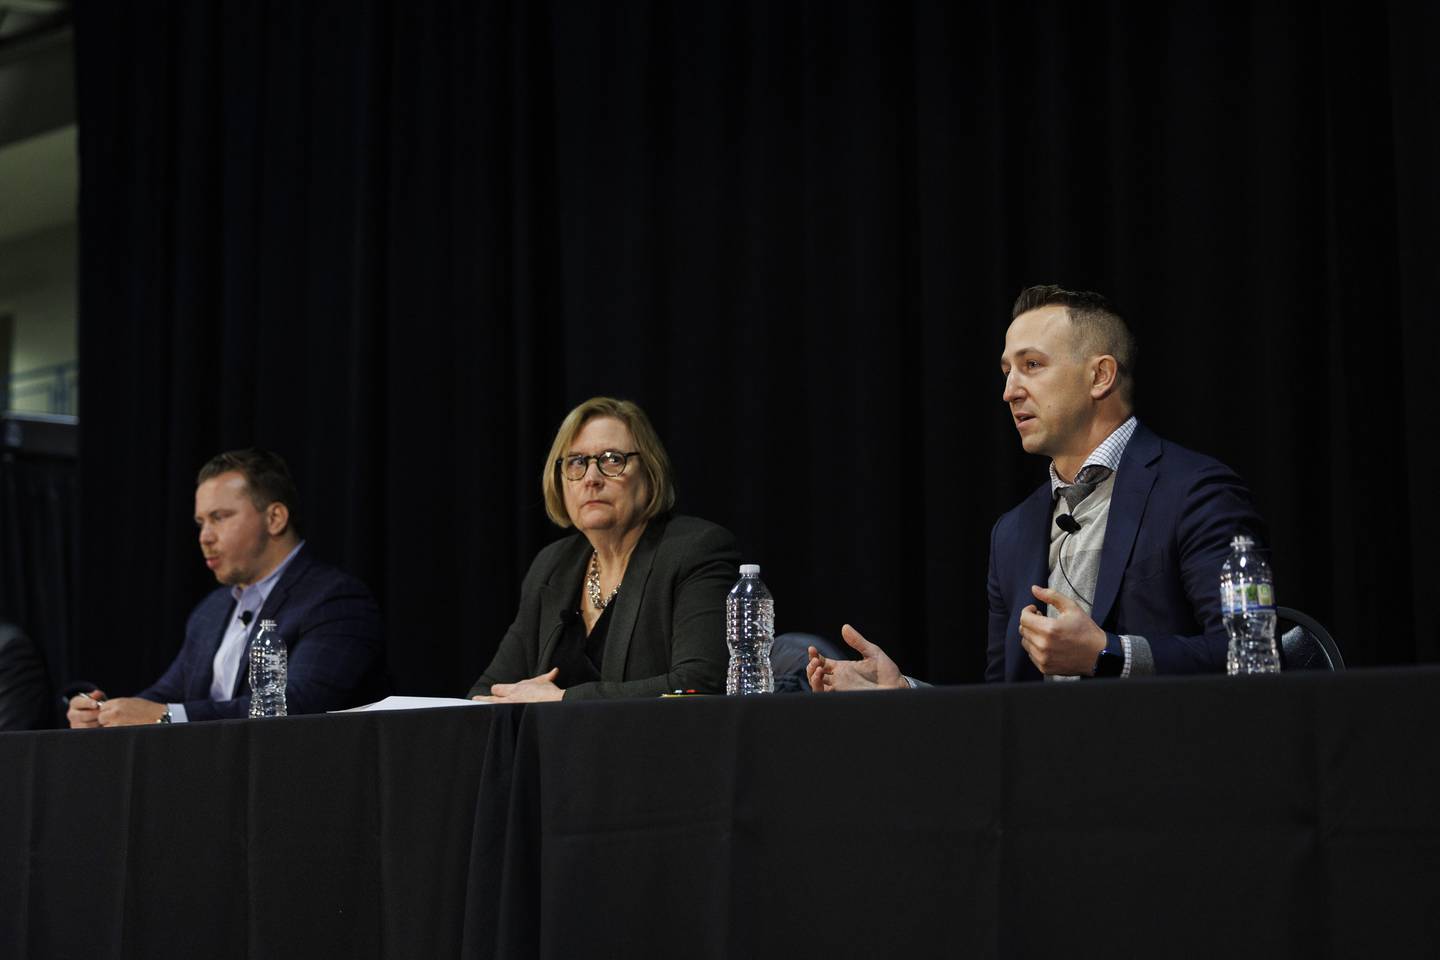 From left, Christopher Jewett, vice-president of corporate development at Bally’s, Christine Carlyle, principal and director of planning at Solomon Cordwell Buenz, and Brad McCauley, managing principal at Site Design Group, answer questions from the public, Dec. 5, 2022, during a Chicago casino town hall.  